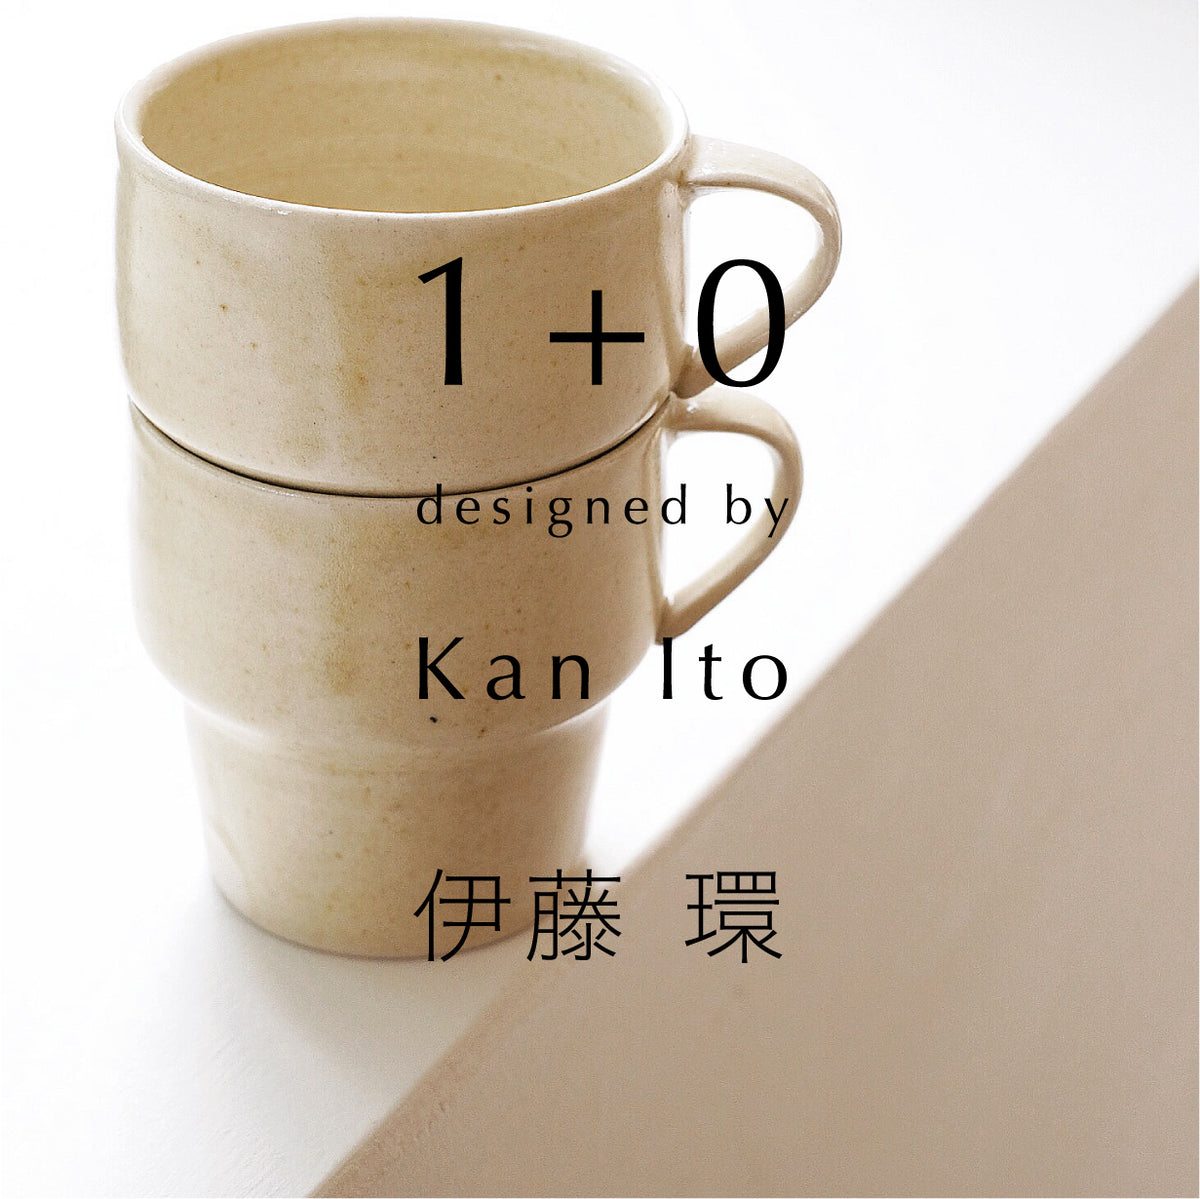 1+0 designed by 伊藤環 Kan Ito – essence kyoto